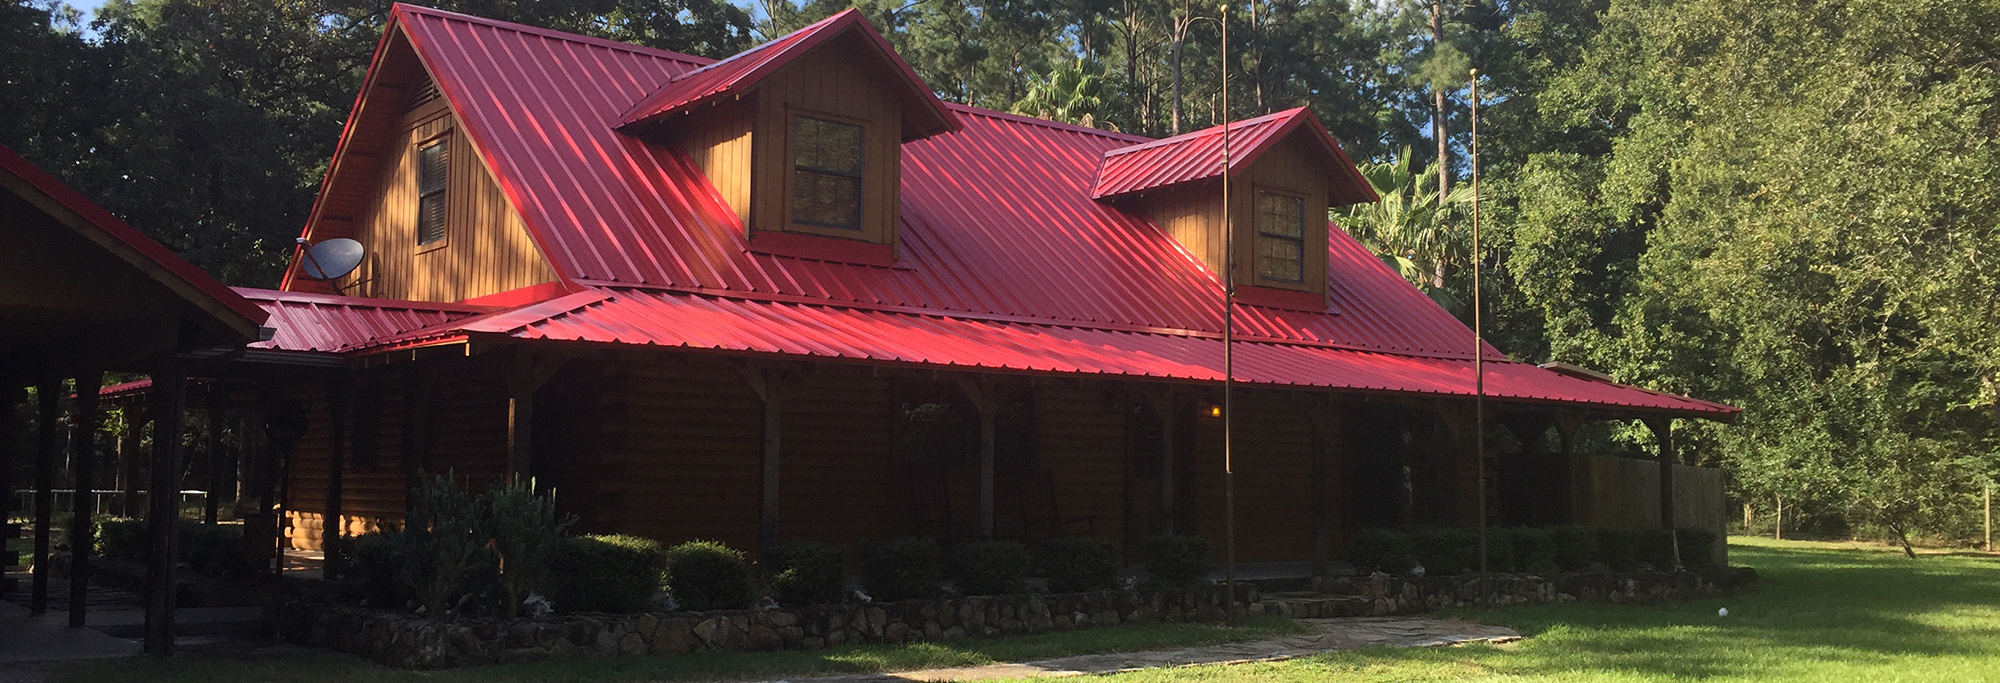 Red Metal Roof